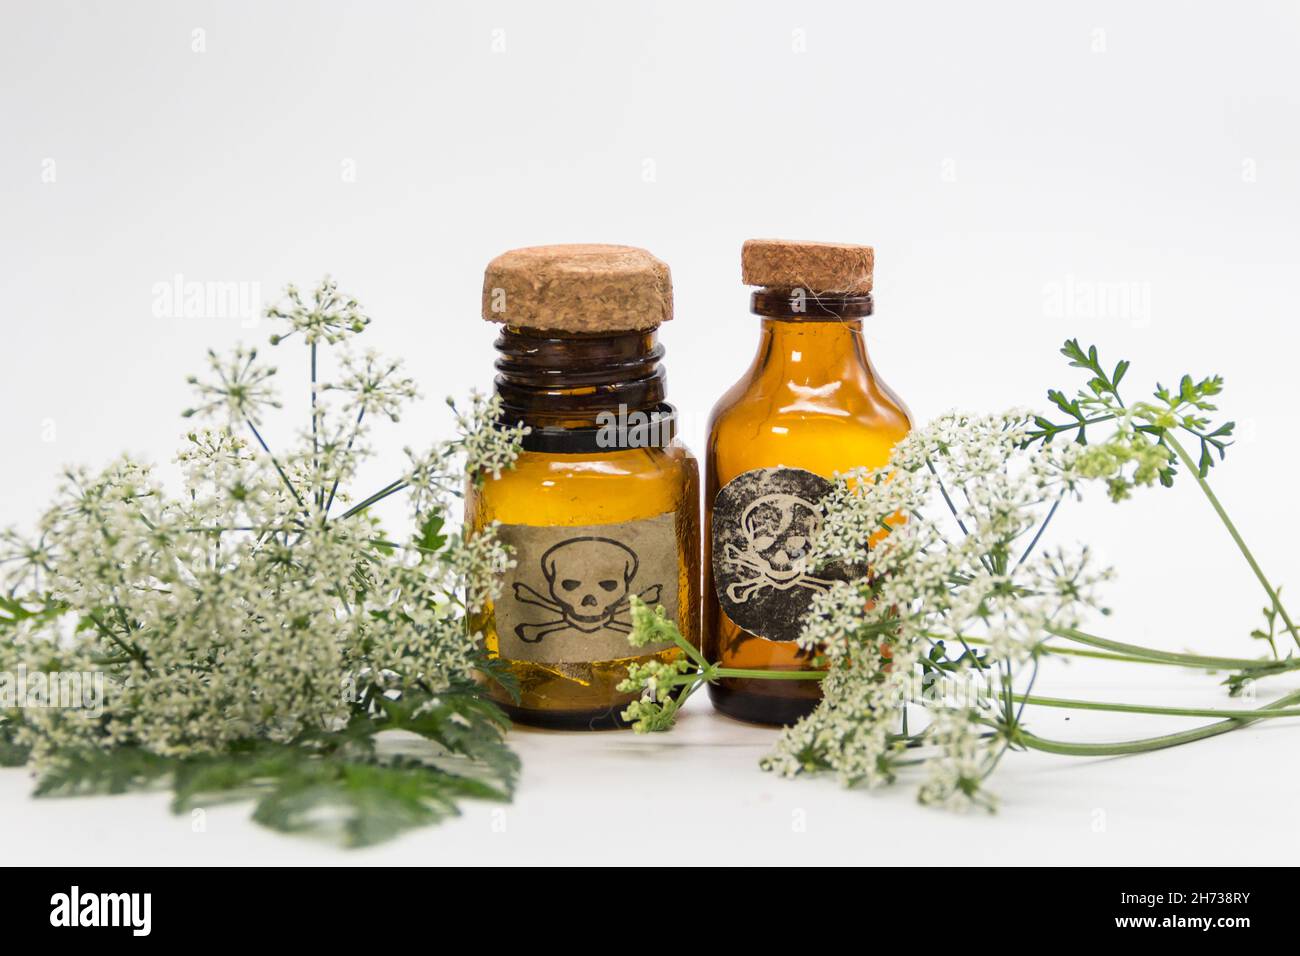 Hemlock flower bouquet with a vial of poison Stock Photo